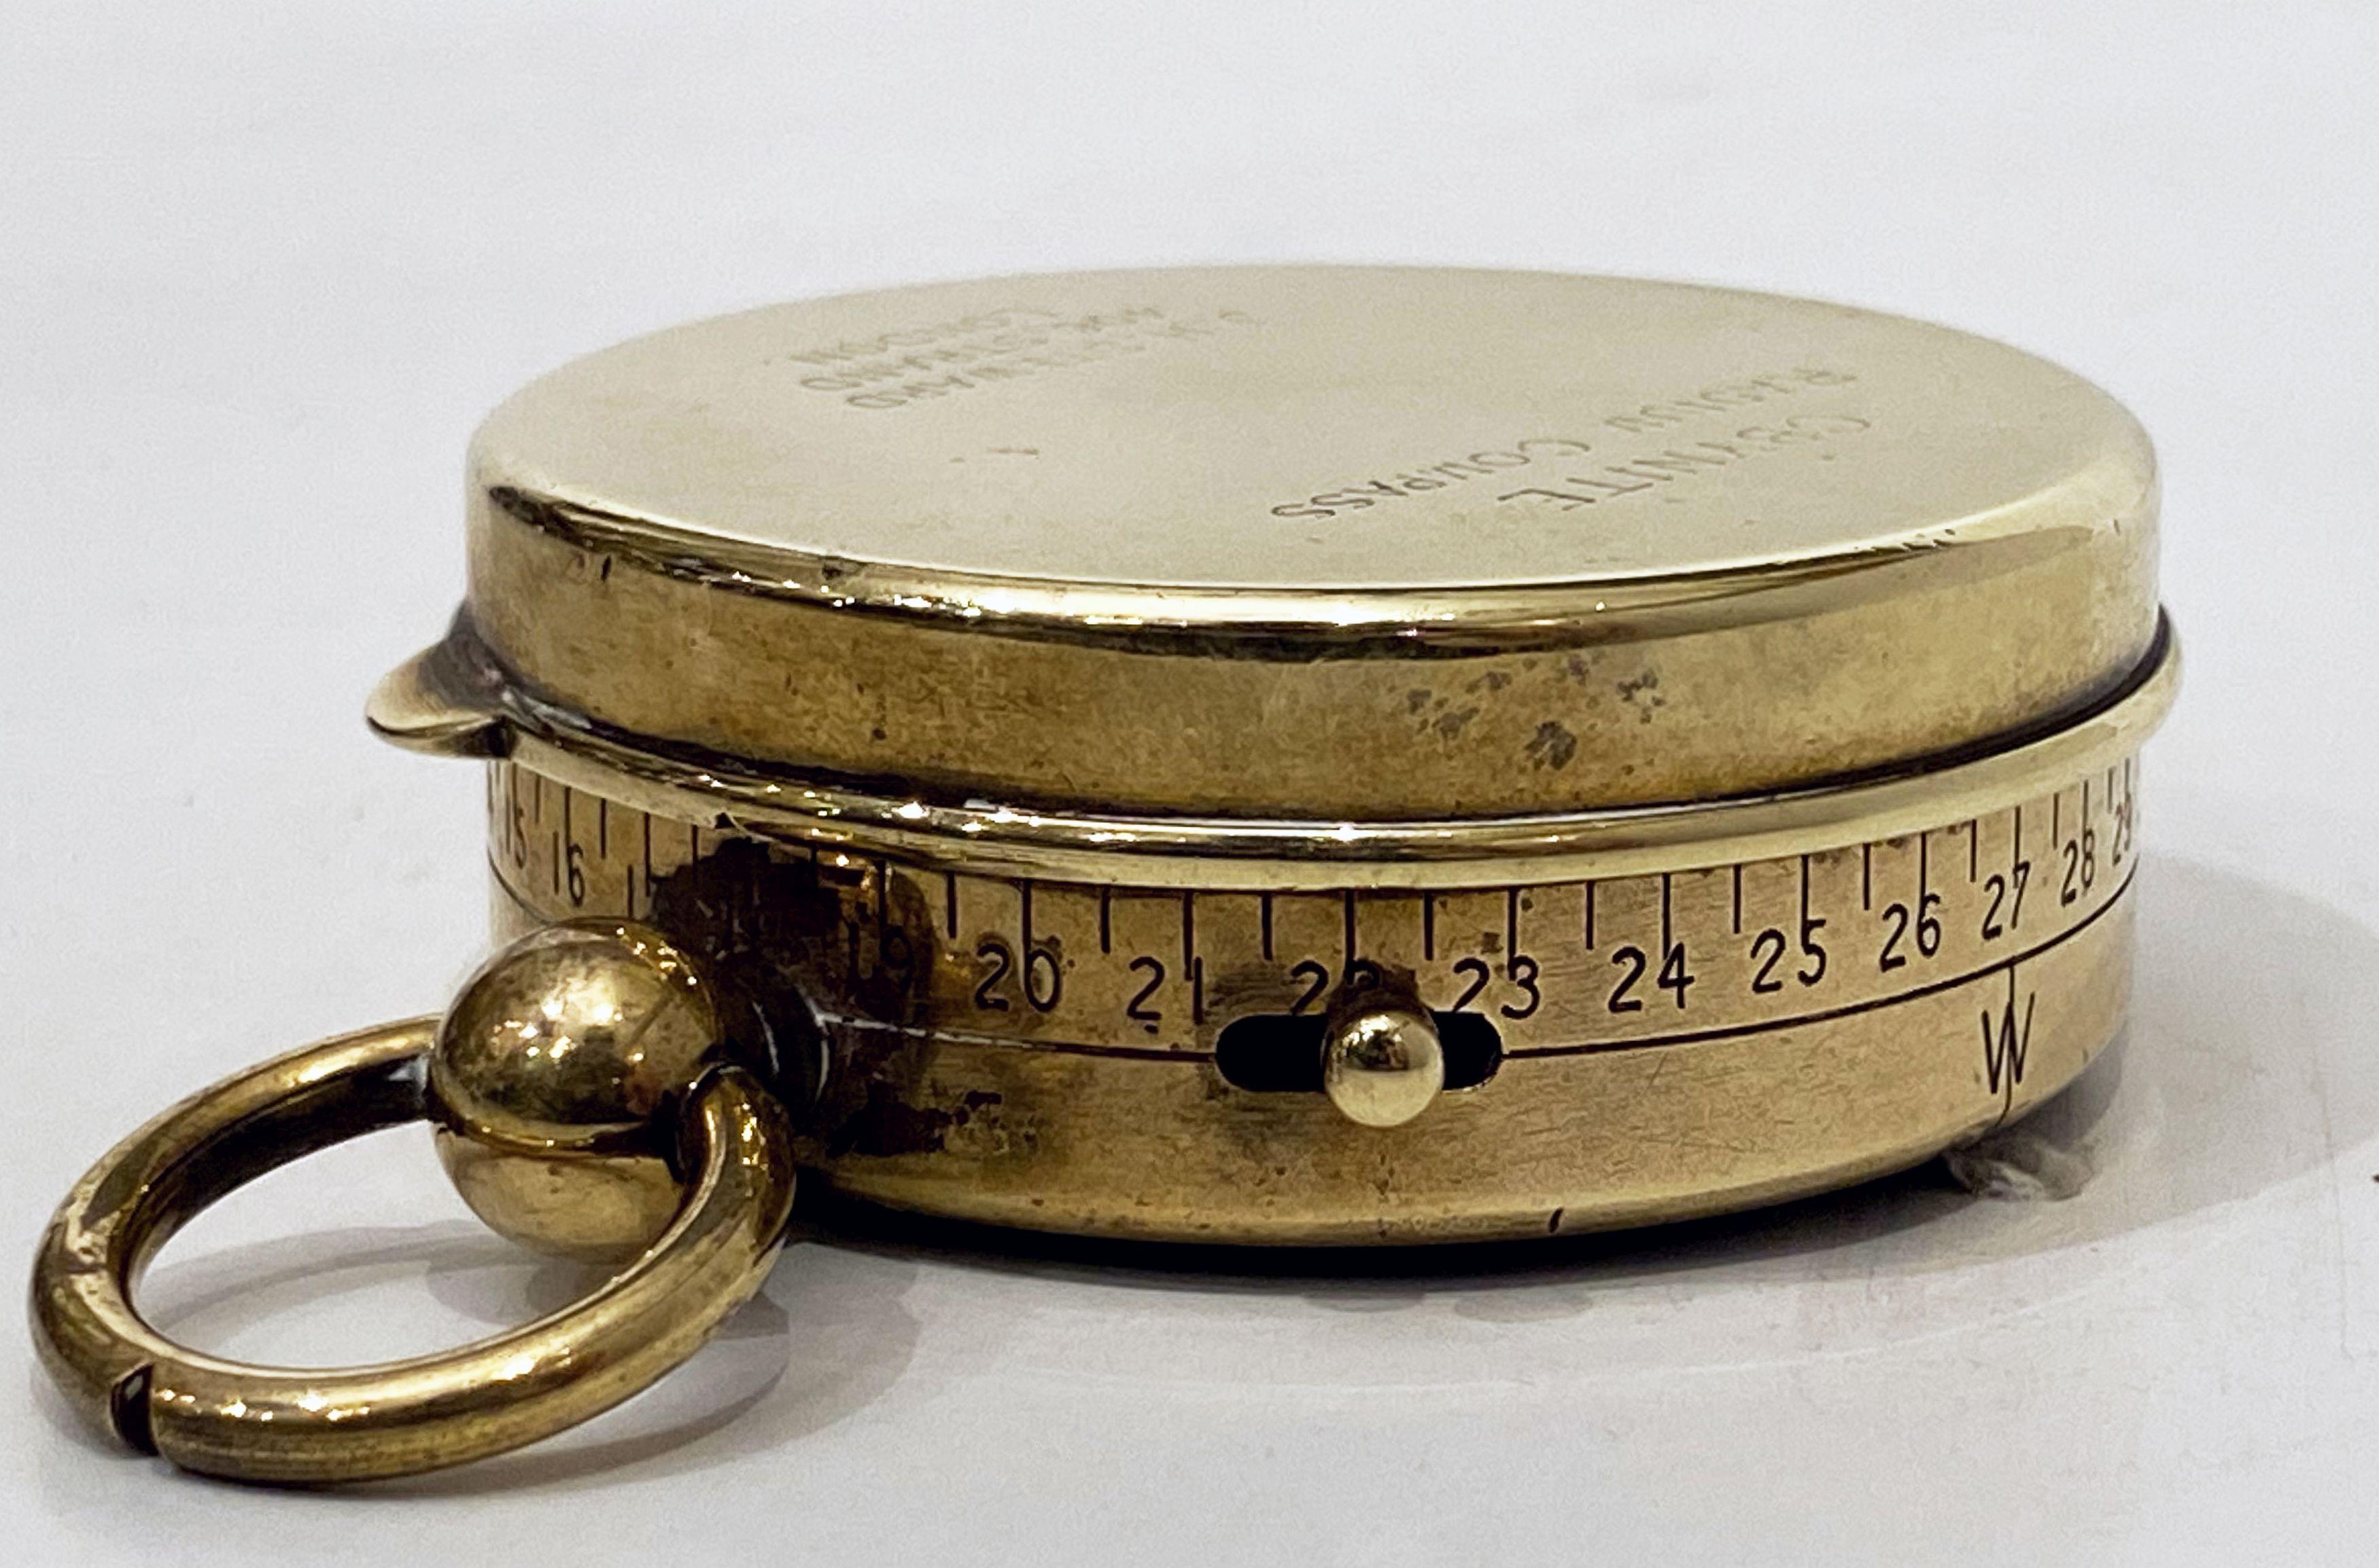 WWI Military Officer's Marching Compass, Cbynite Radium Compass 4